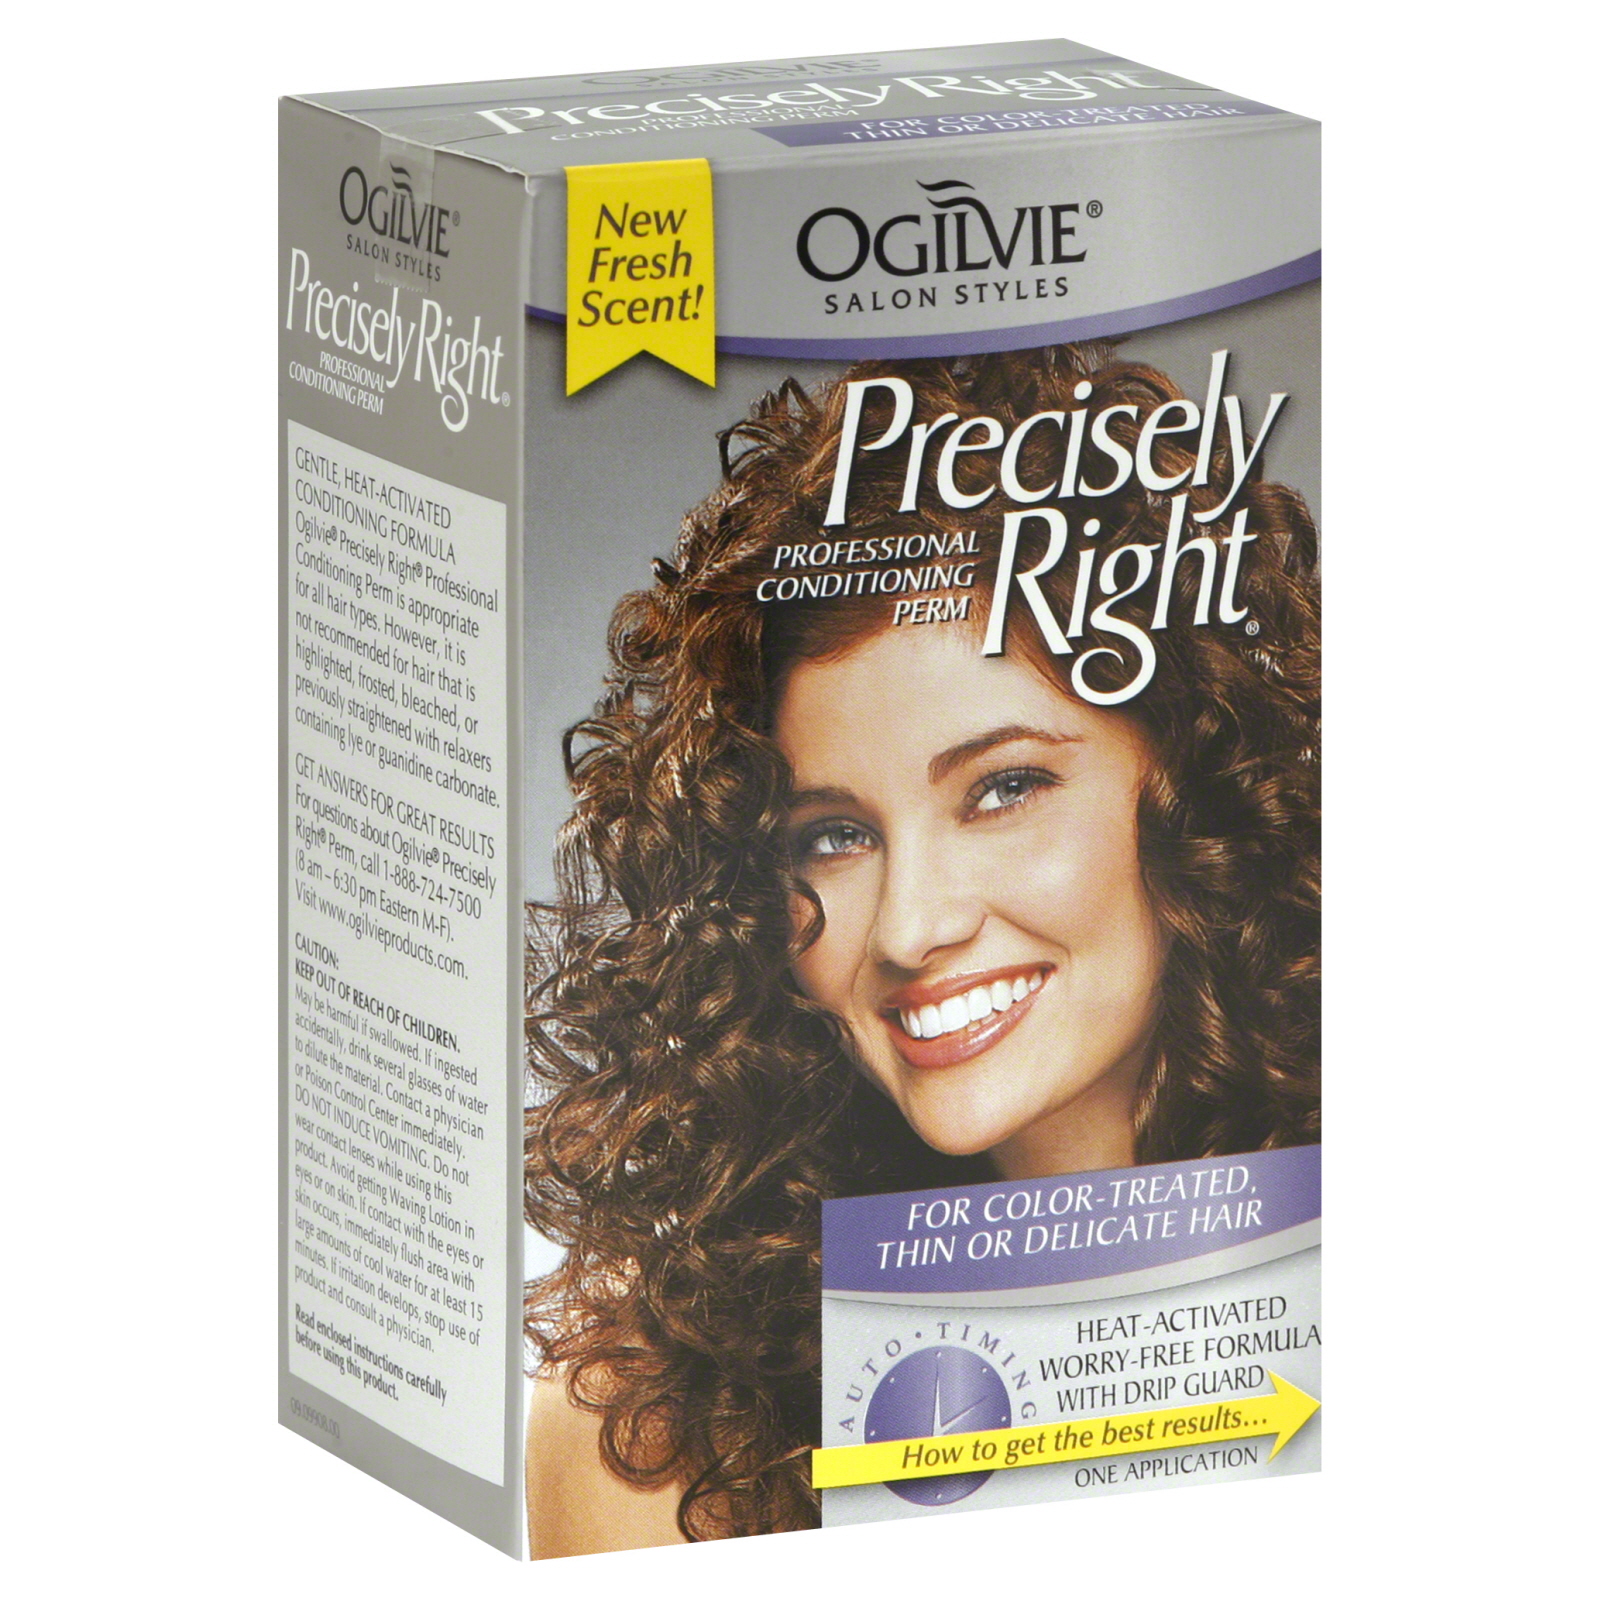 Ogilvie Salon Styles Precisely Right, Professional Conditioning Perm, 1 application